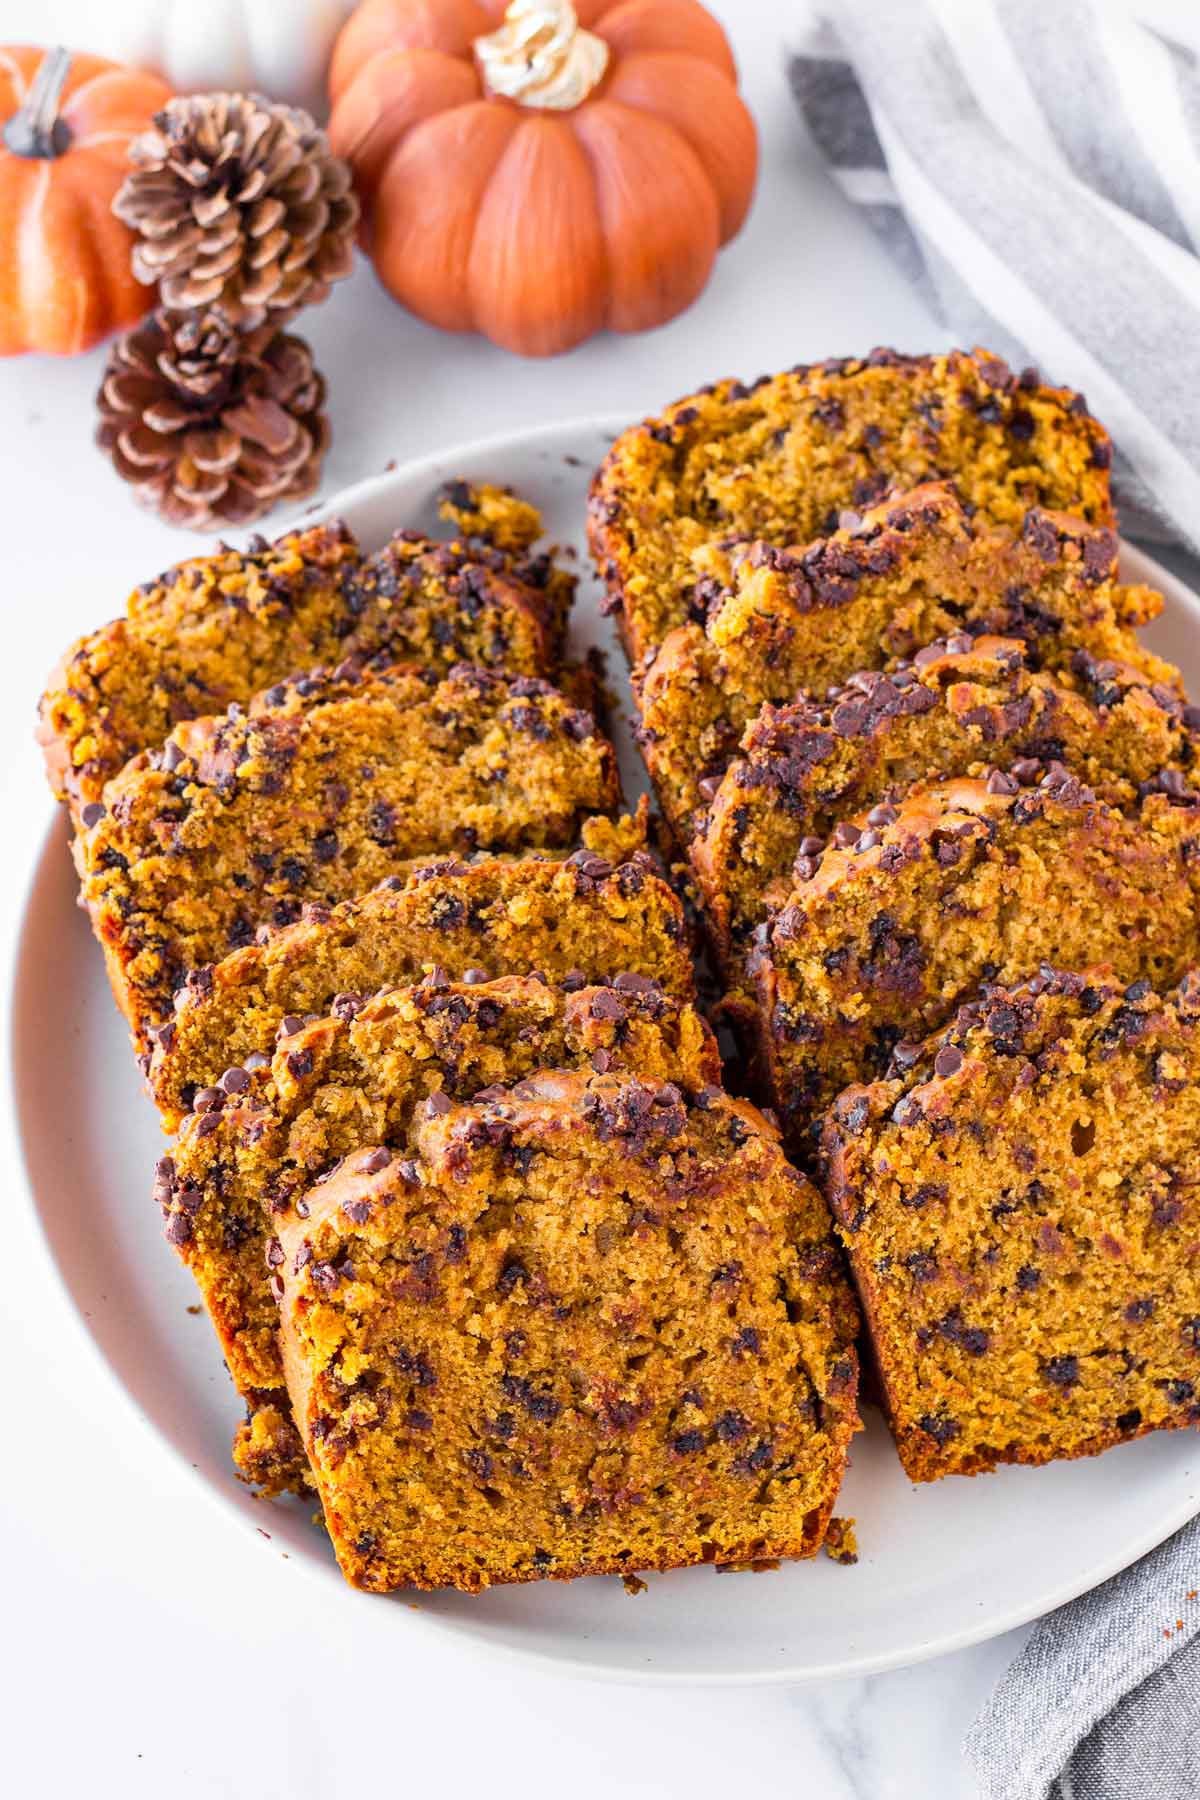 slices of pumpkin chocolate chip bread arranged on a plate